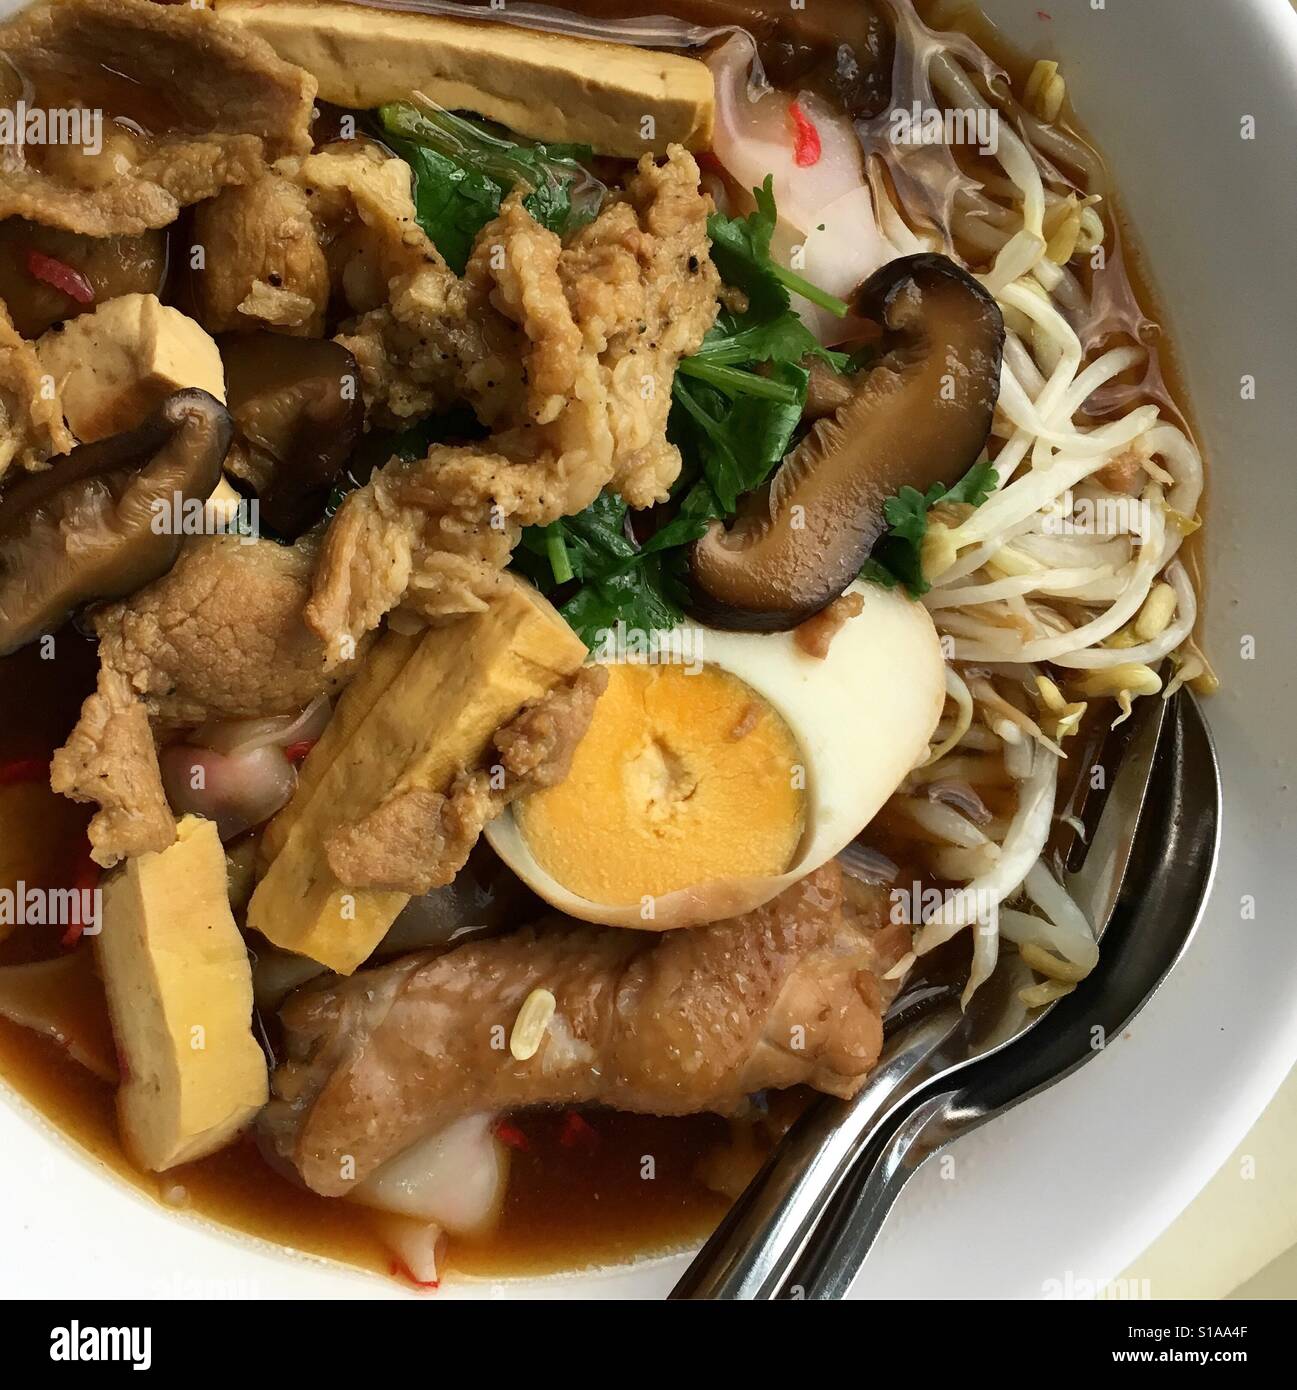 Palatable Asian noodle in brown soup with mixed meats, egg and vegetables Stock Photo